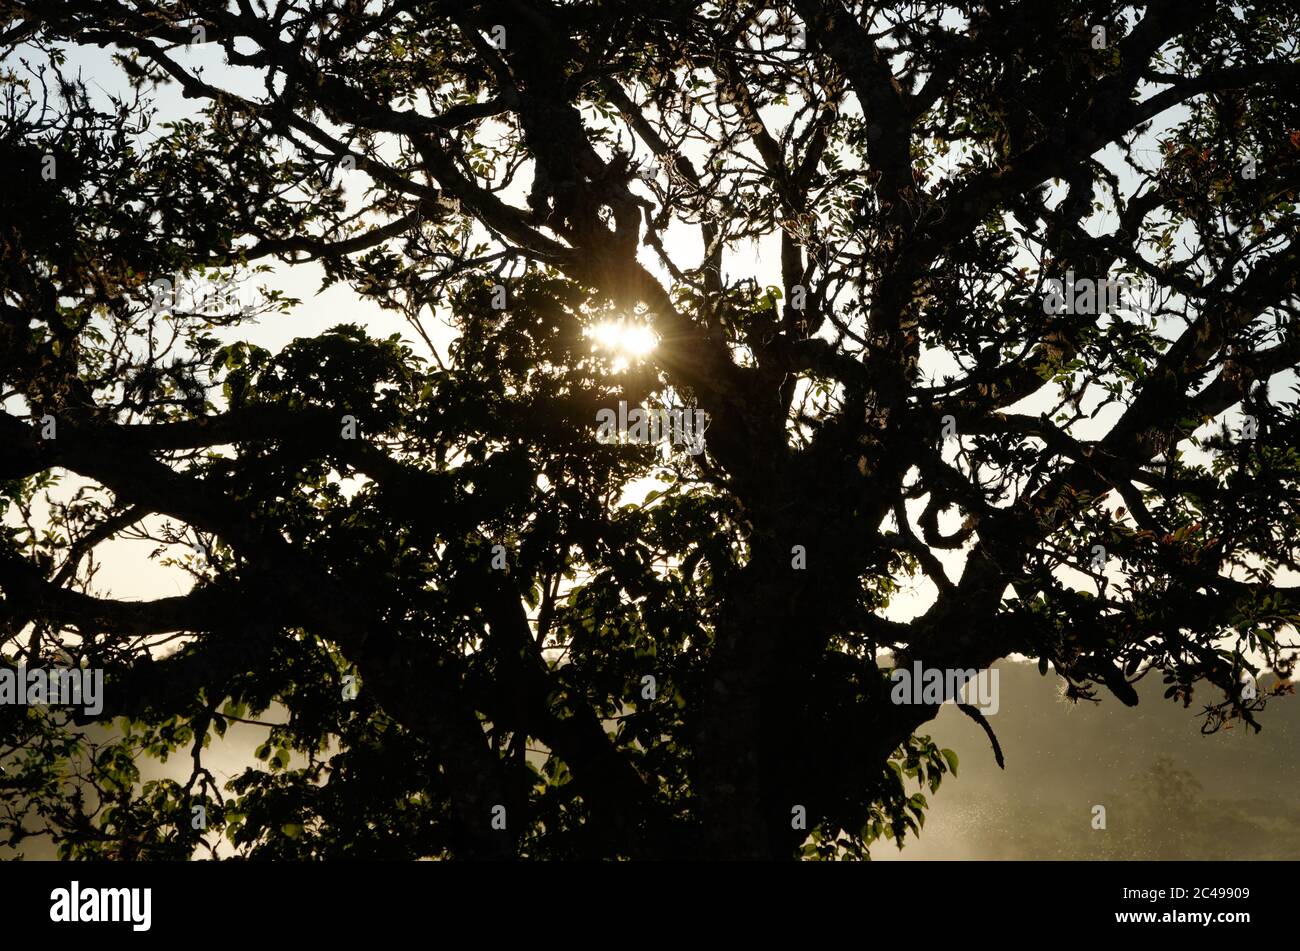 Trees in silhouette against a setting sun at Iguacu falls, Brazil, South America Stock Photo